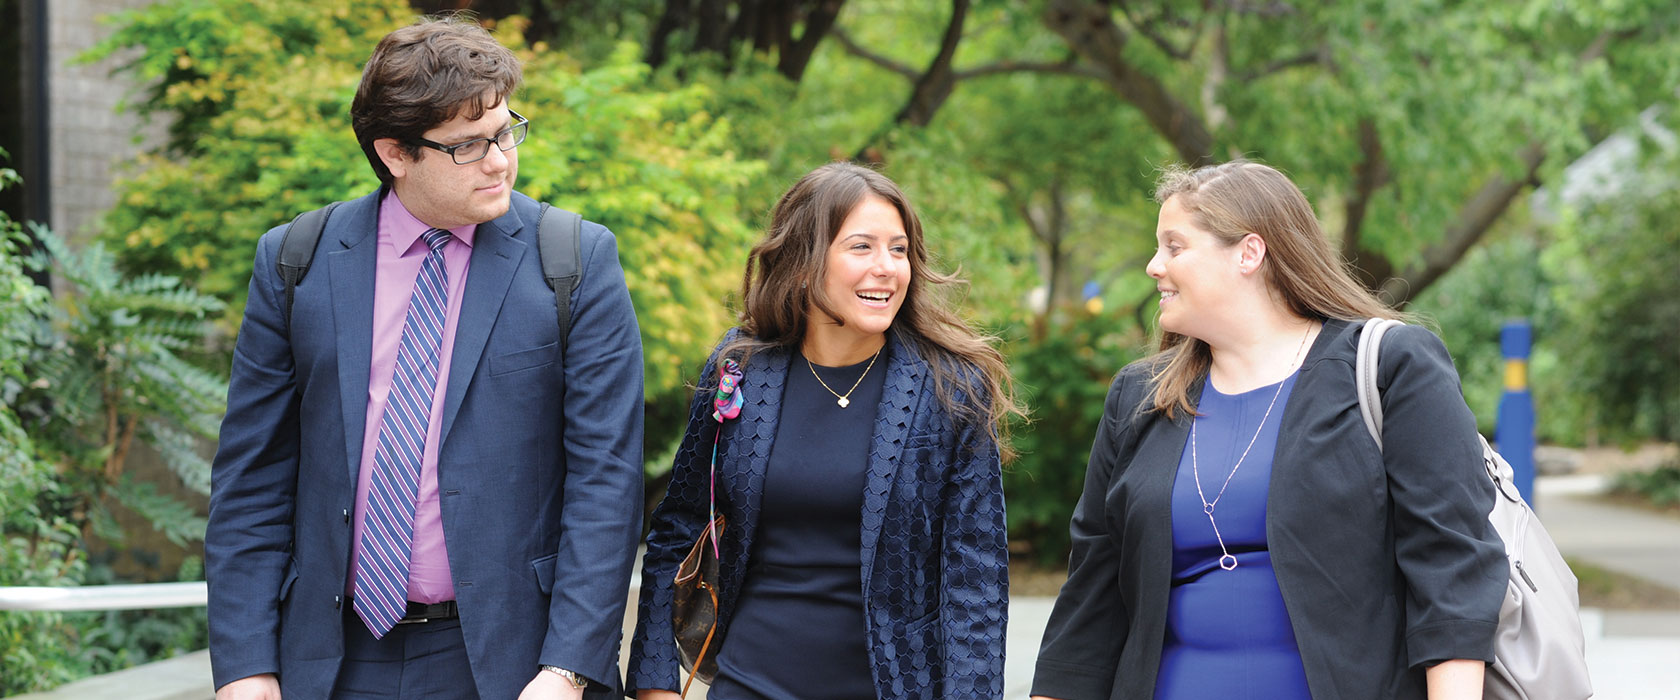 Three students walking together on campus. 